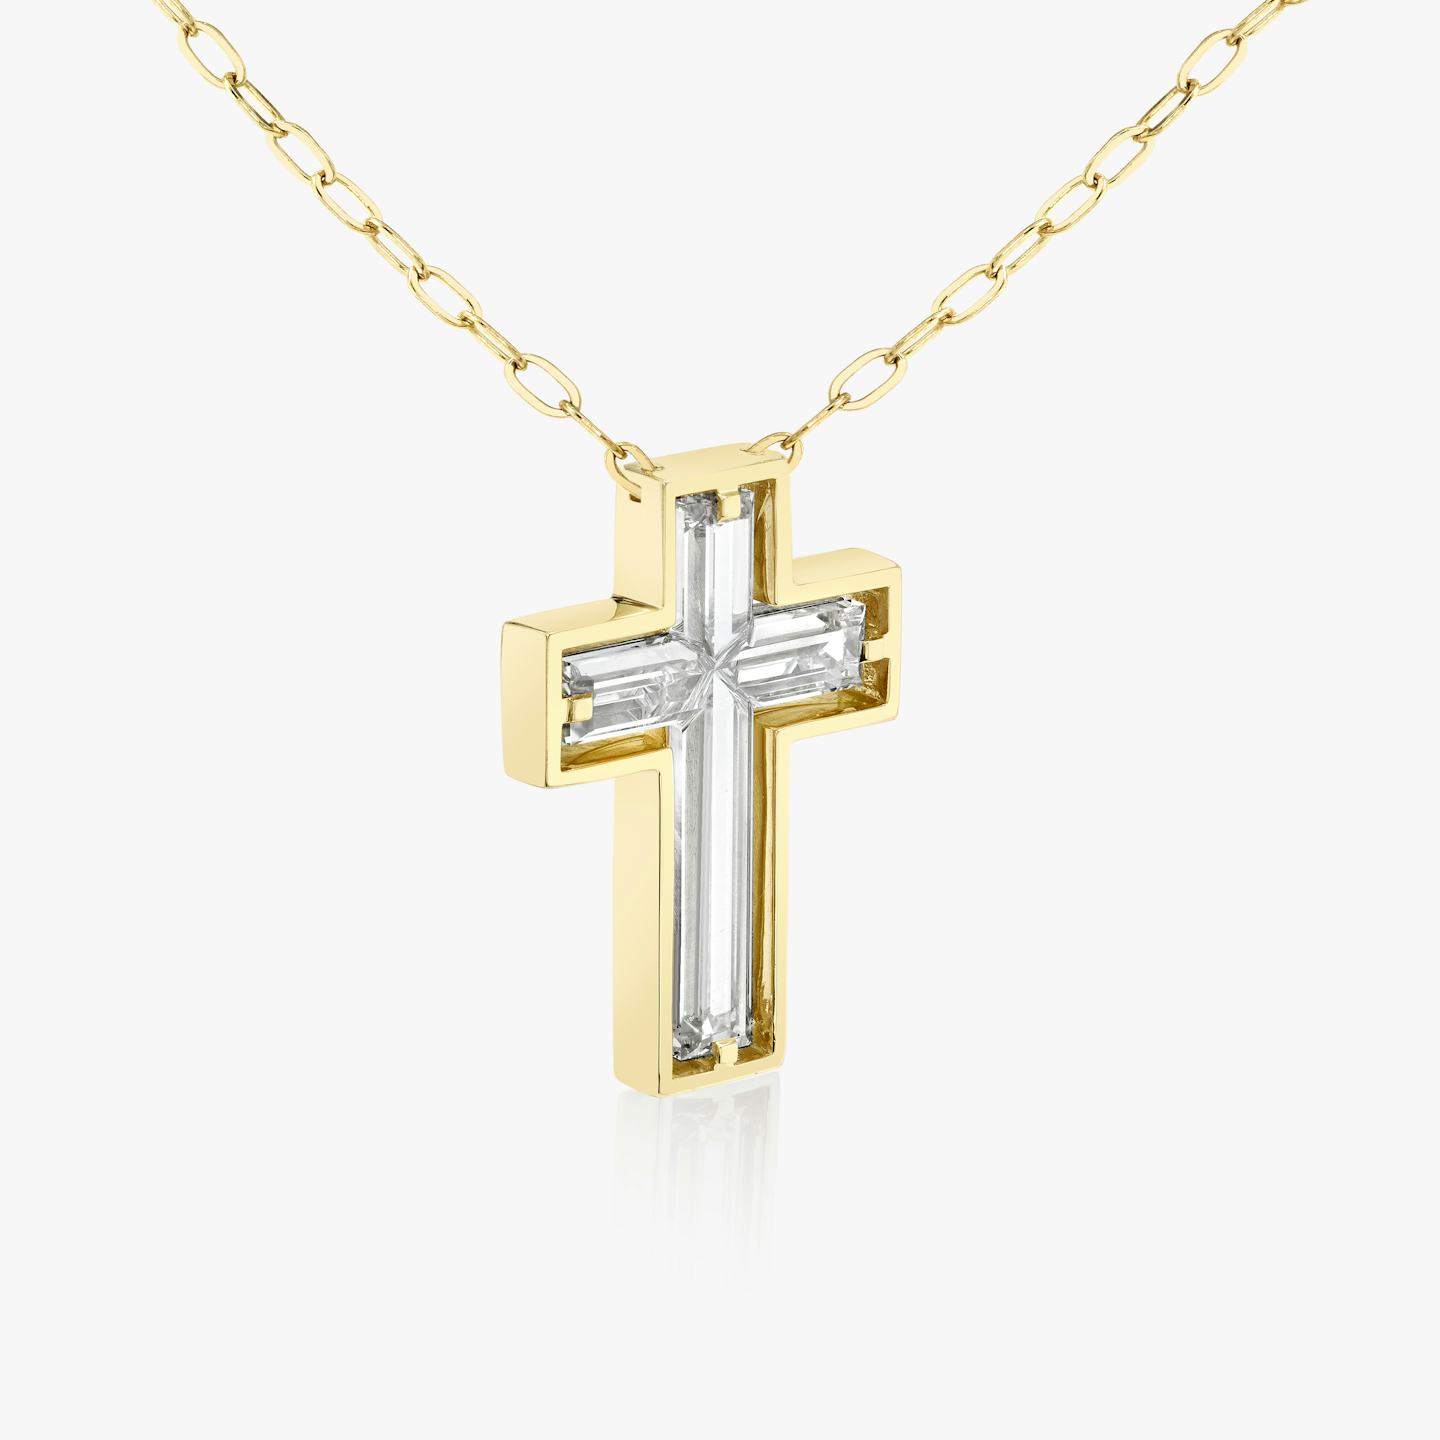 Suspended Solitaire Cross | 18k | 18k Yellow Gold | Chain length: 18-20